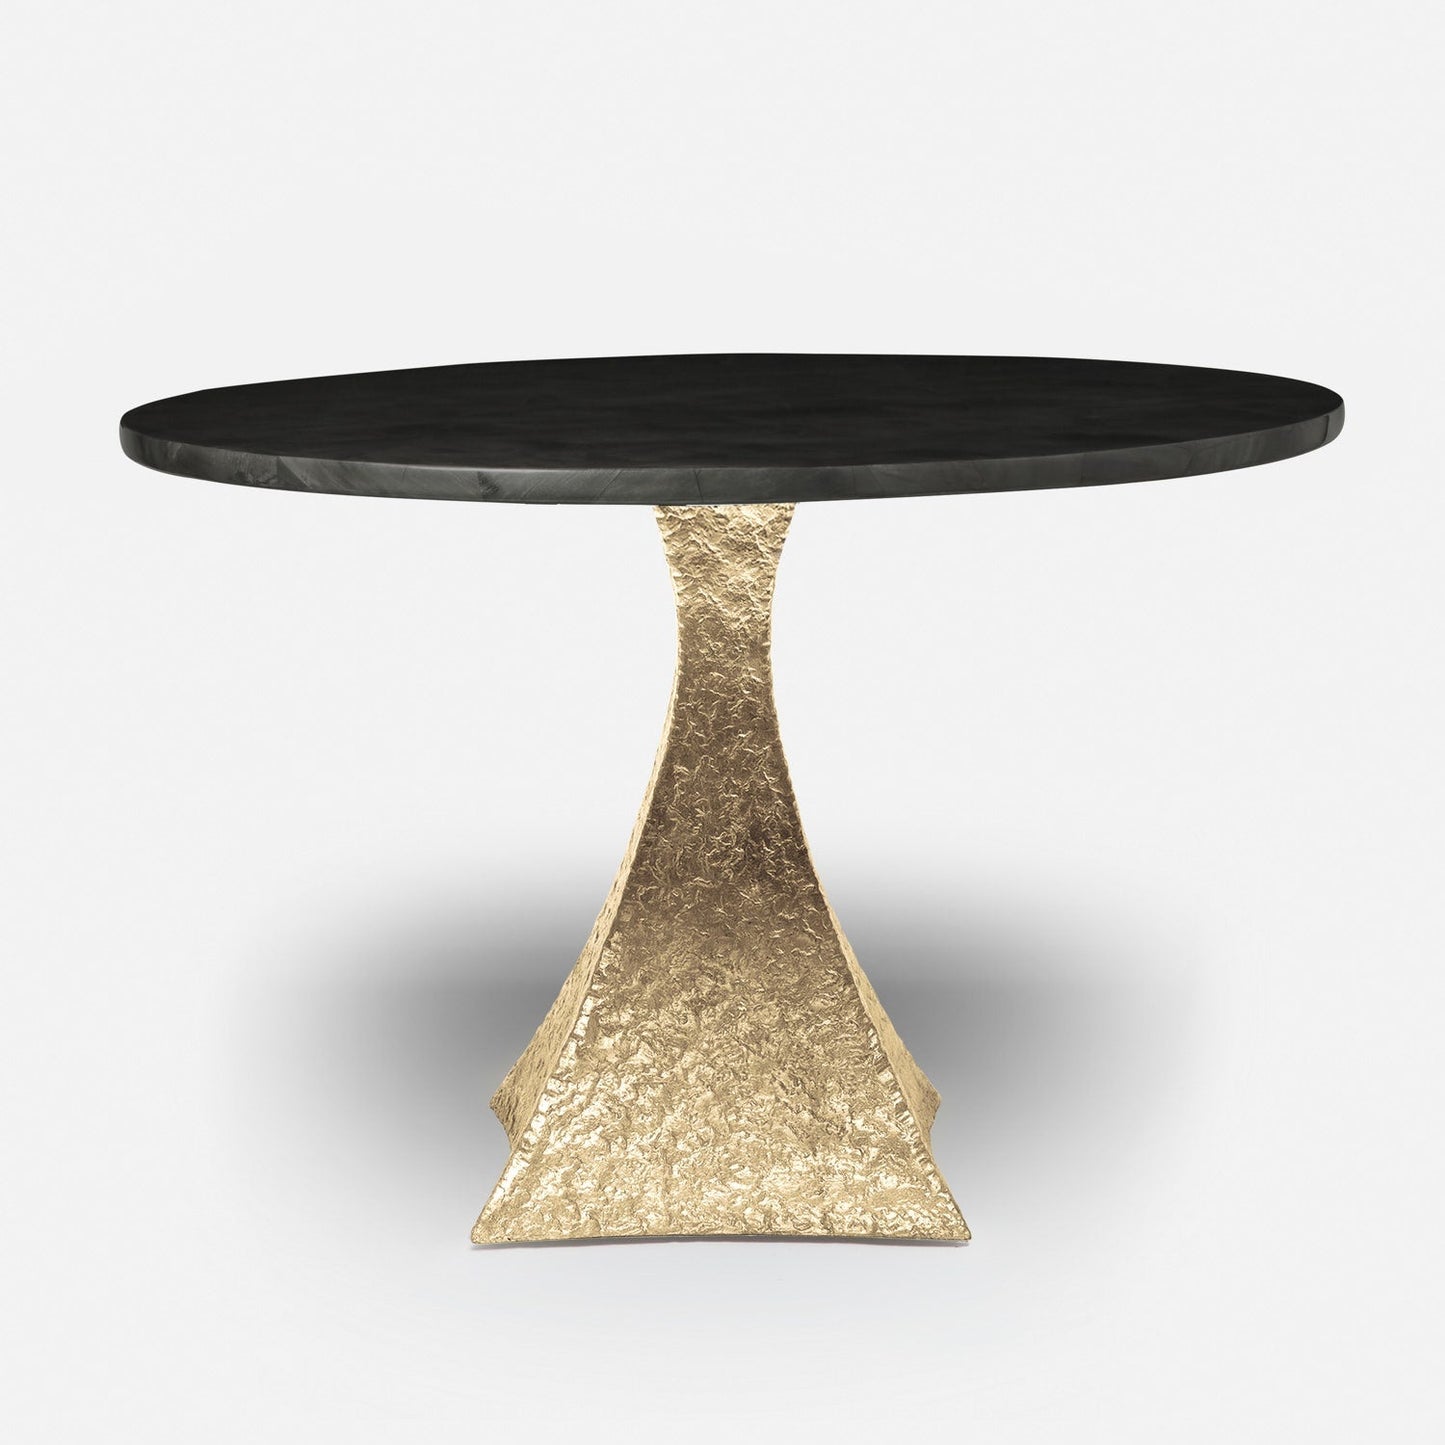 Made Goods Noor 48" x 30" Bumpy Cool Gold Iron Dinning Table With Round Dark Faux Horn Table Top